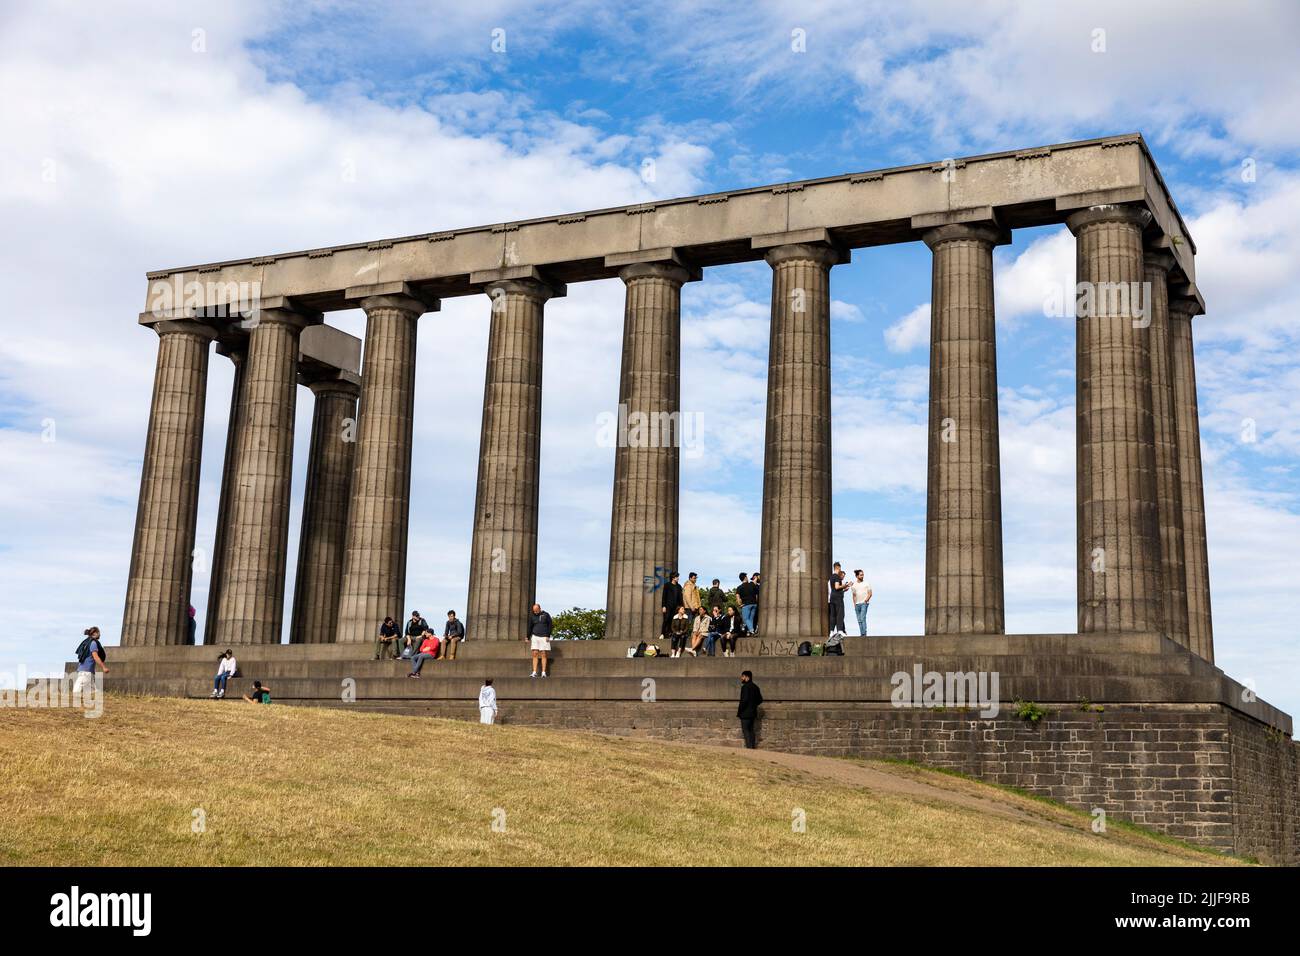 The National Monument of Scotland on Calton Hill Edinburgh, based on the Pantheon to remember Scottish soldiers perished in the Napoleonic Wars,UK. Stock Photo